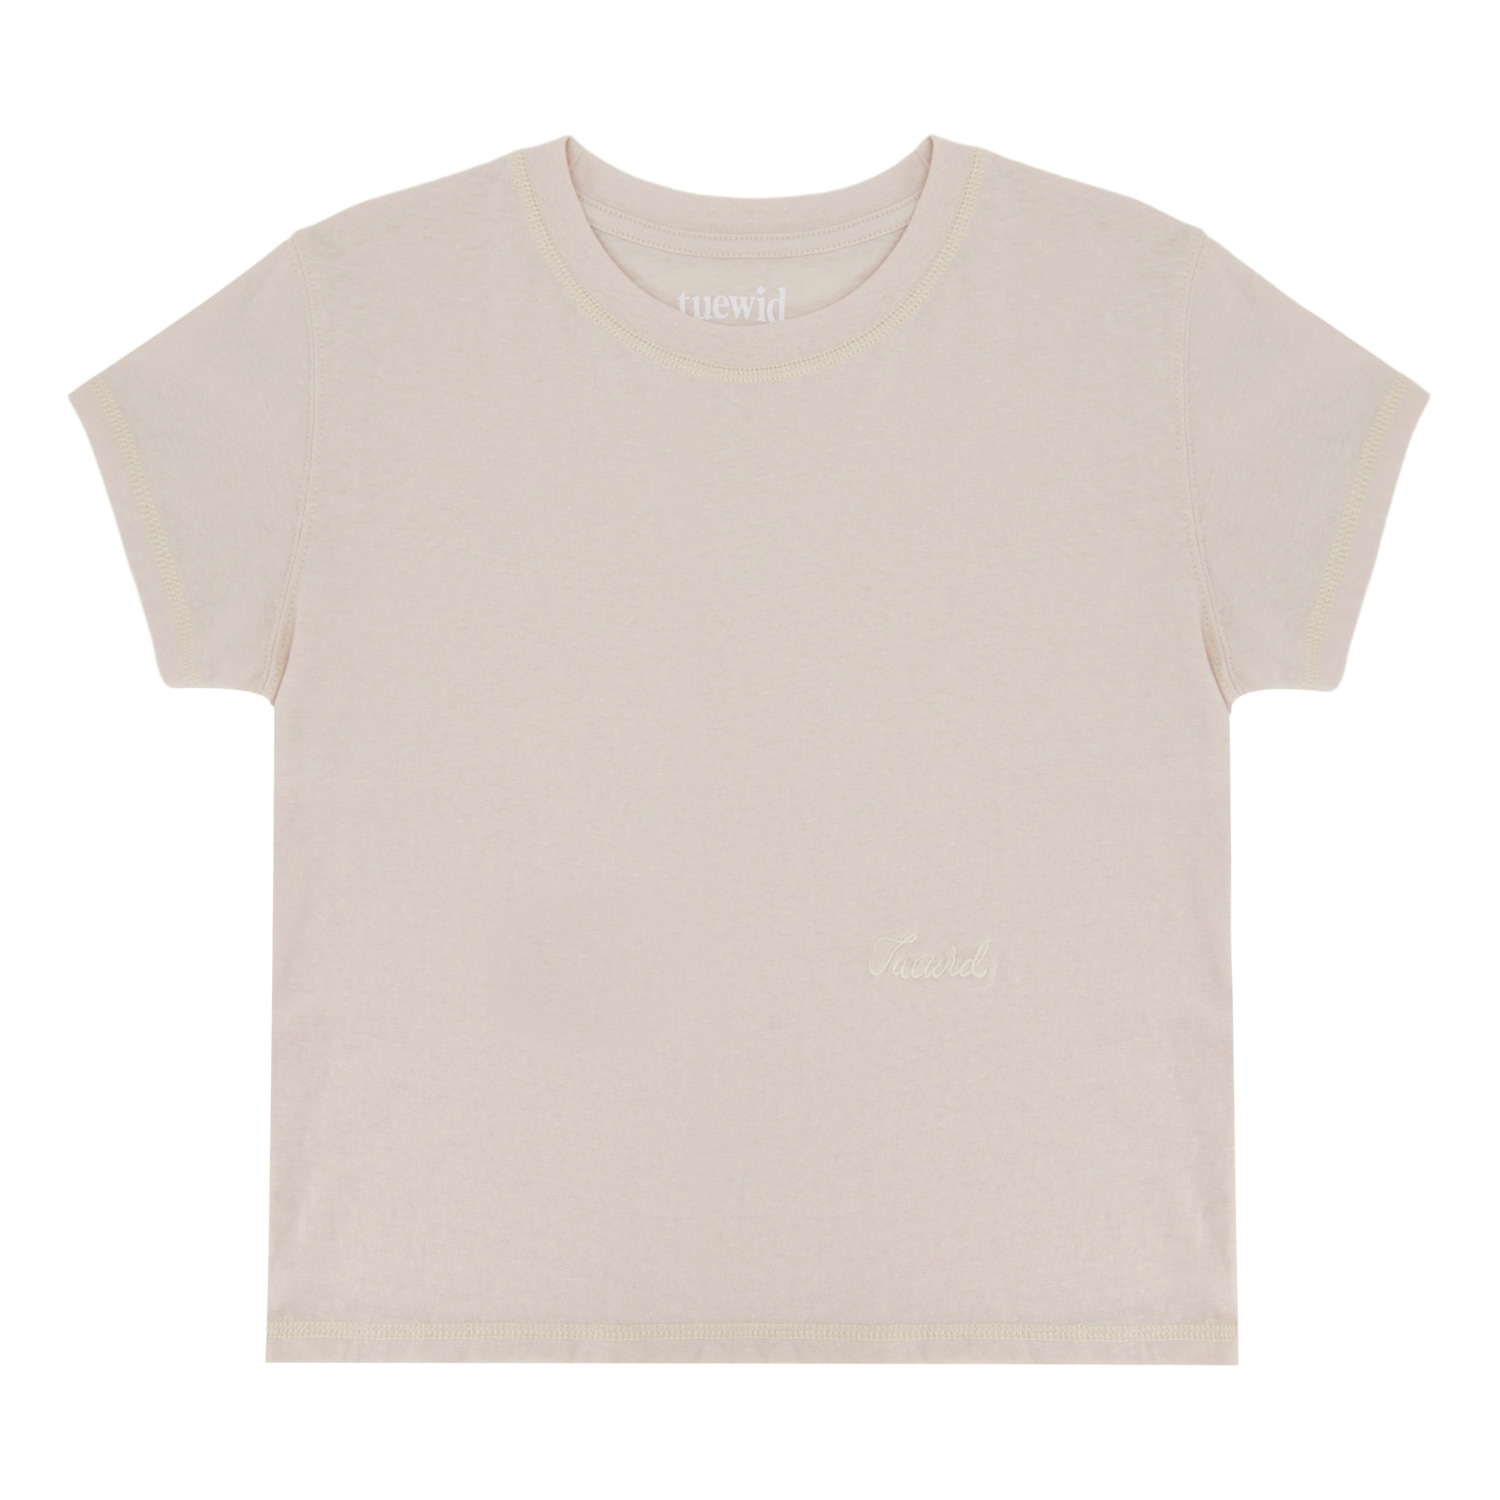 Tuewid classic micro crop t-shirts in Natural Sand